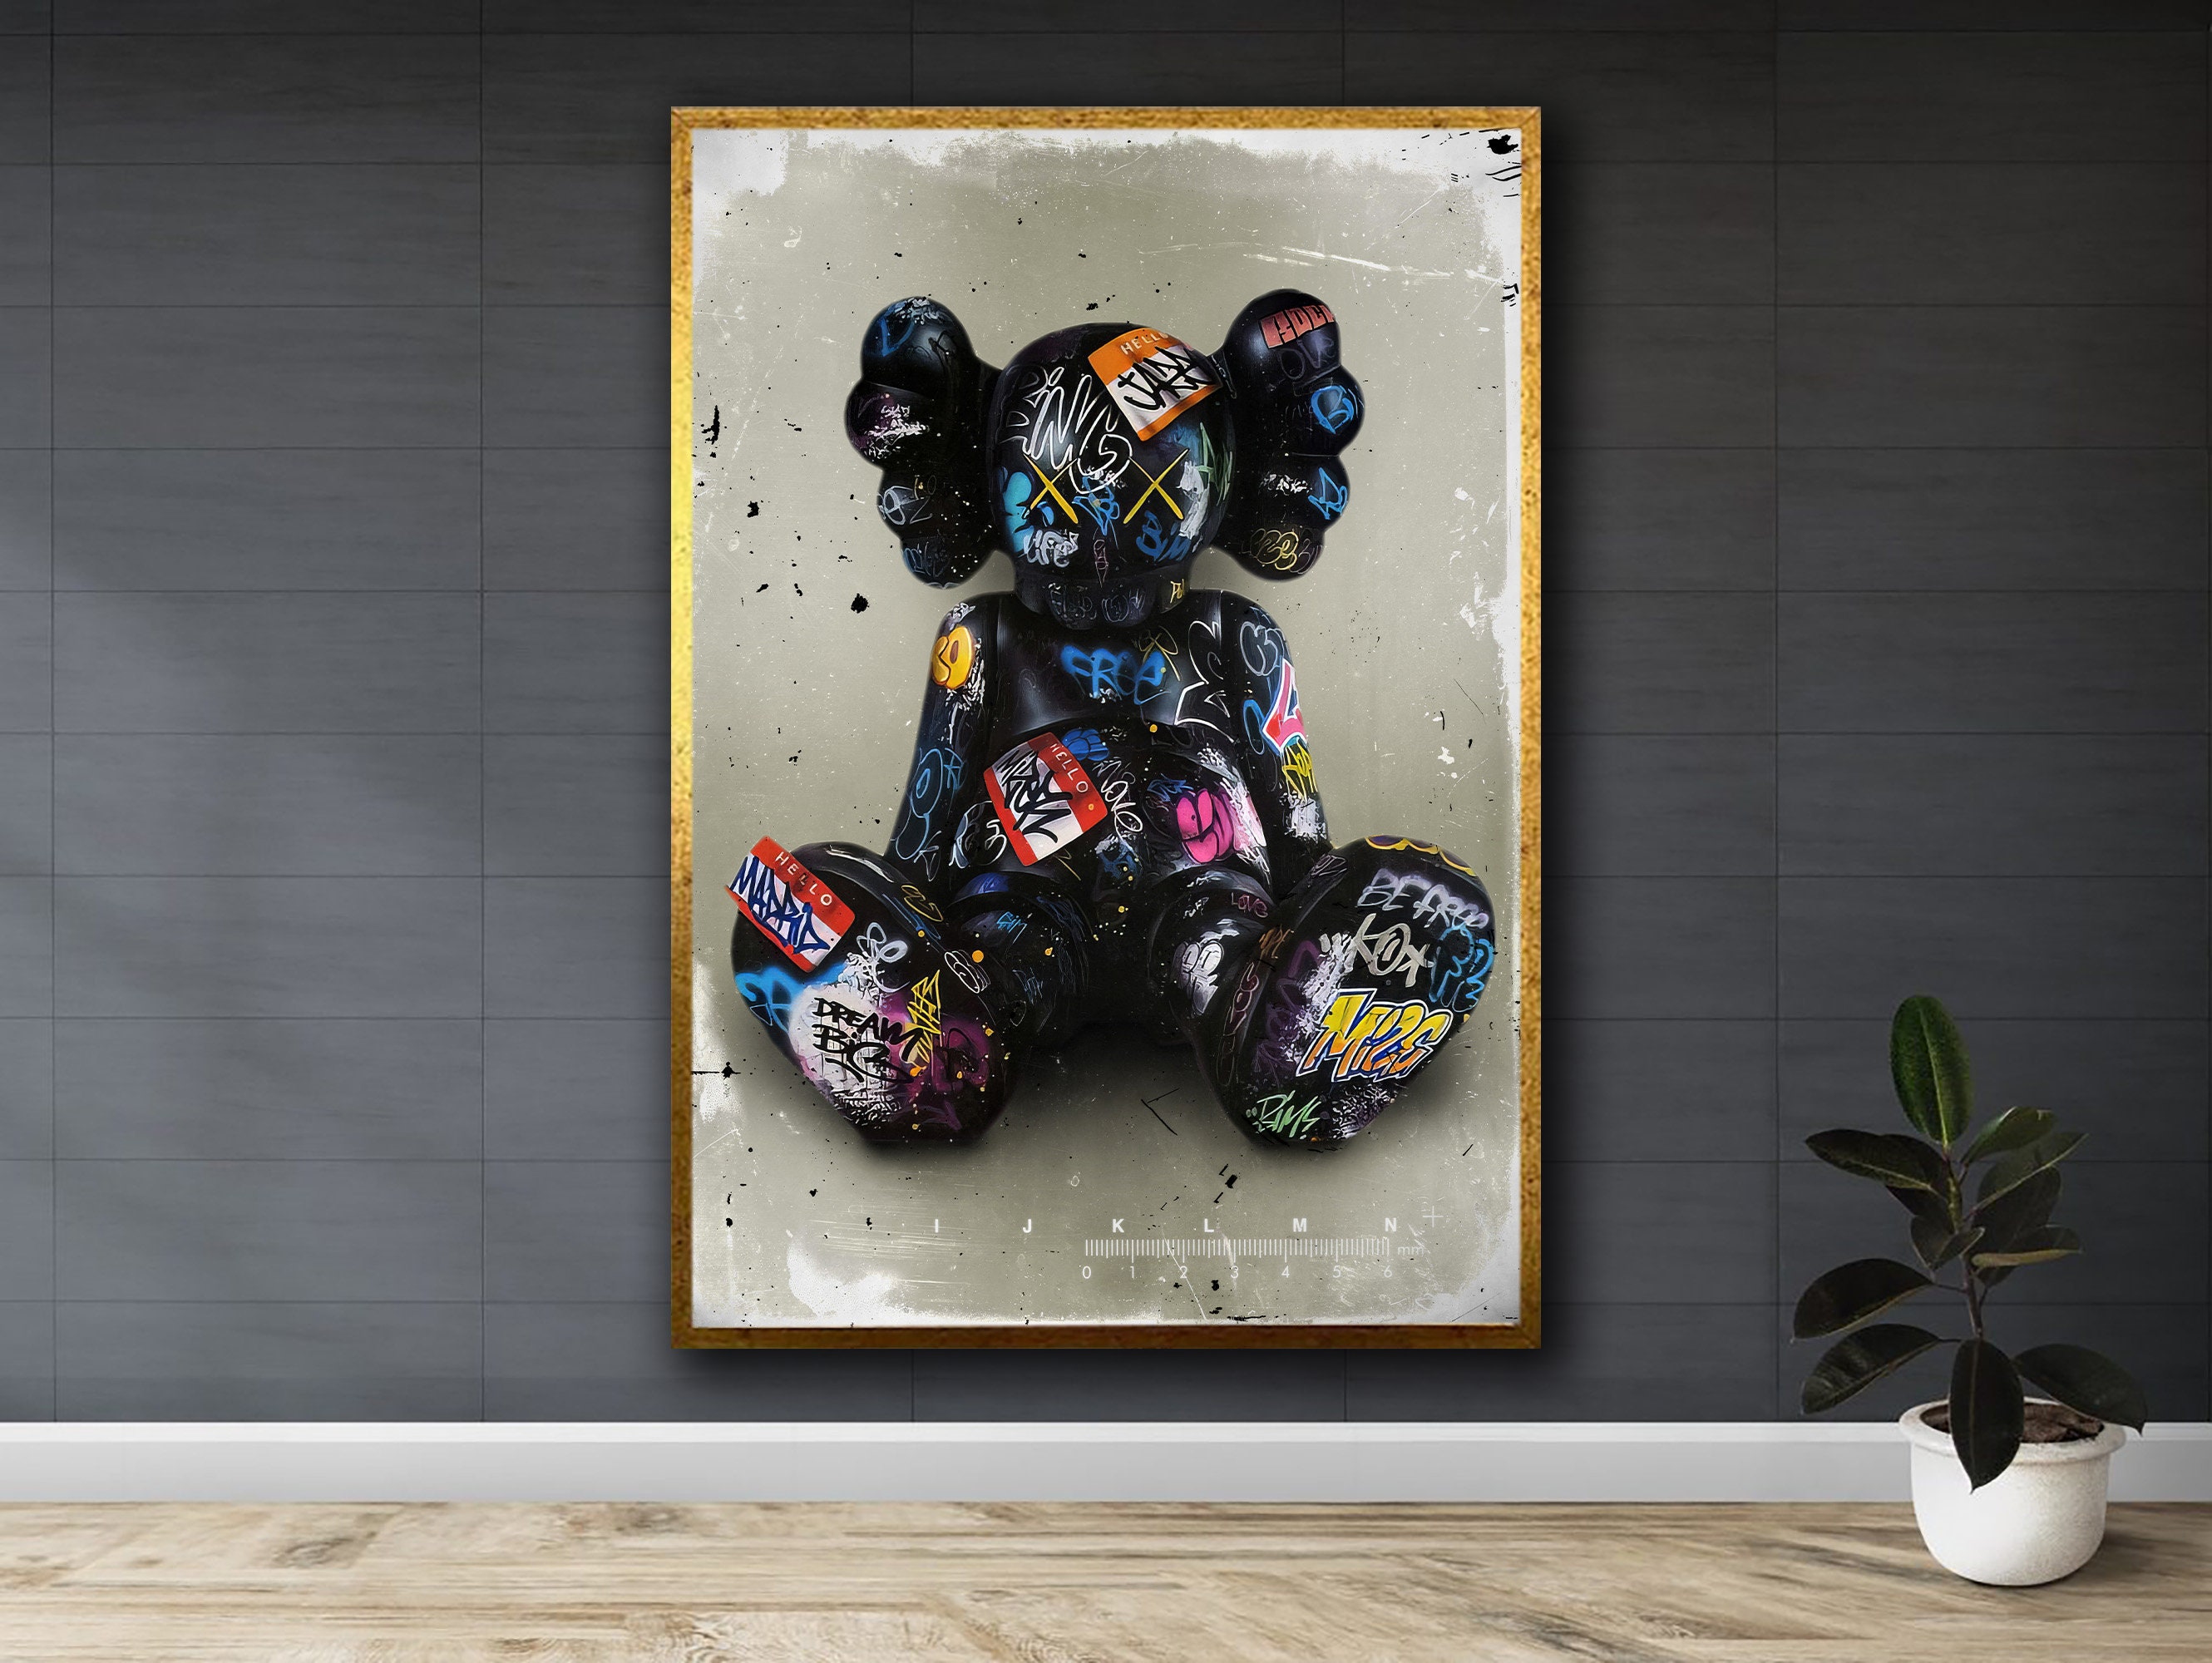 Japan b-bearbrick Poster Prints Wall Pictures Living Room Home